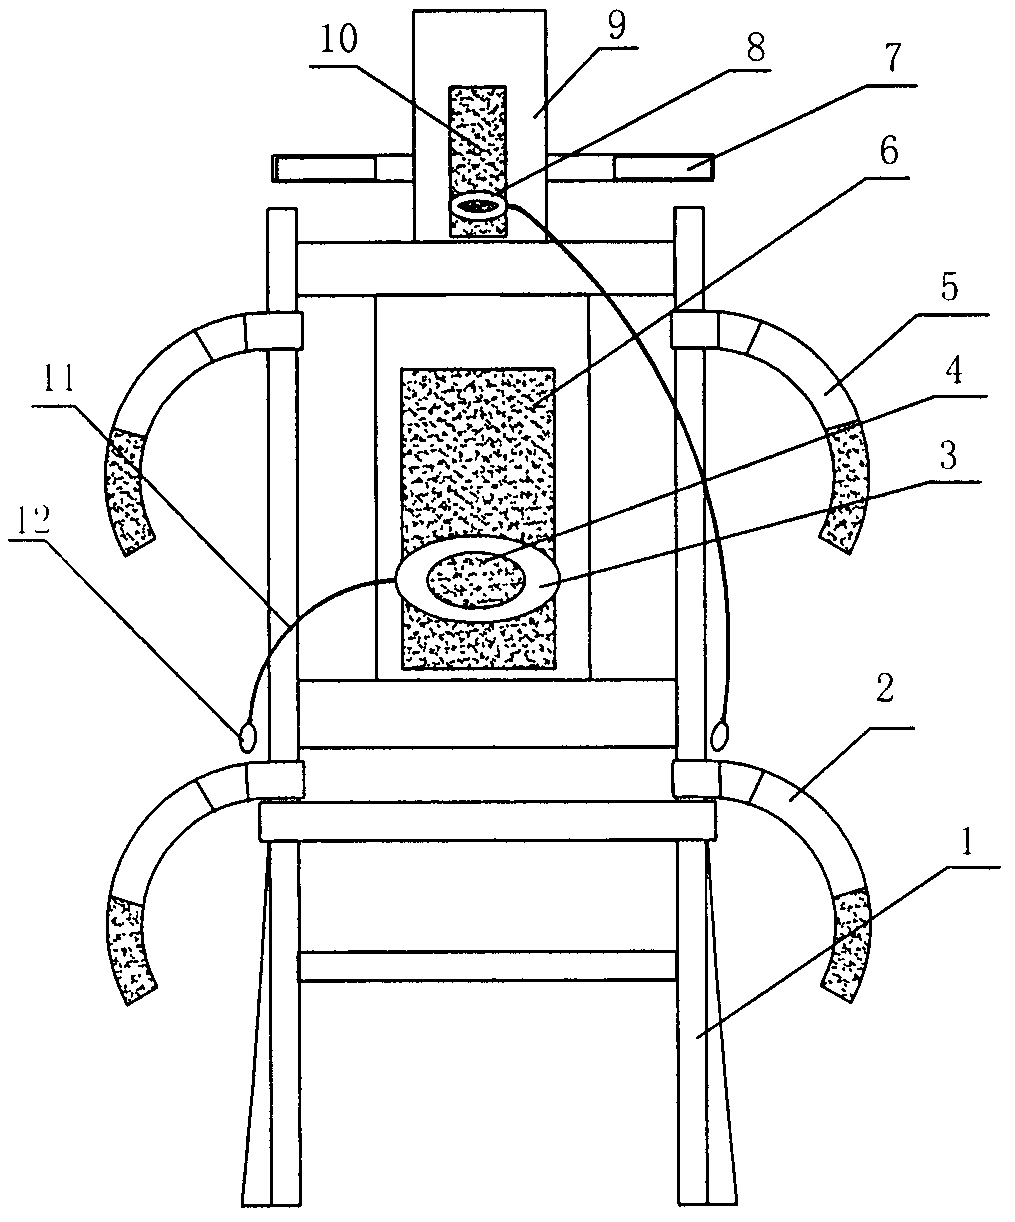 Device for preventing and treating lumbar and cervical disc herniation